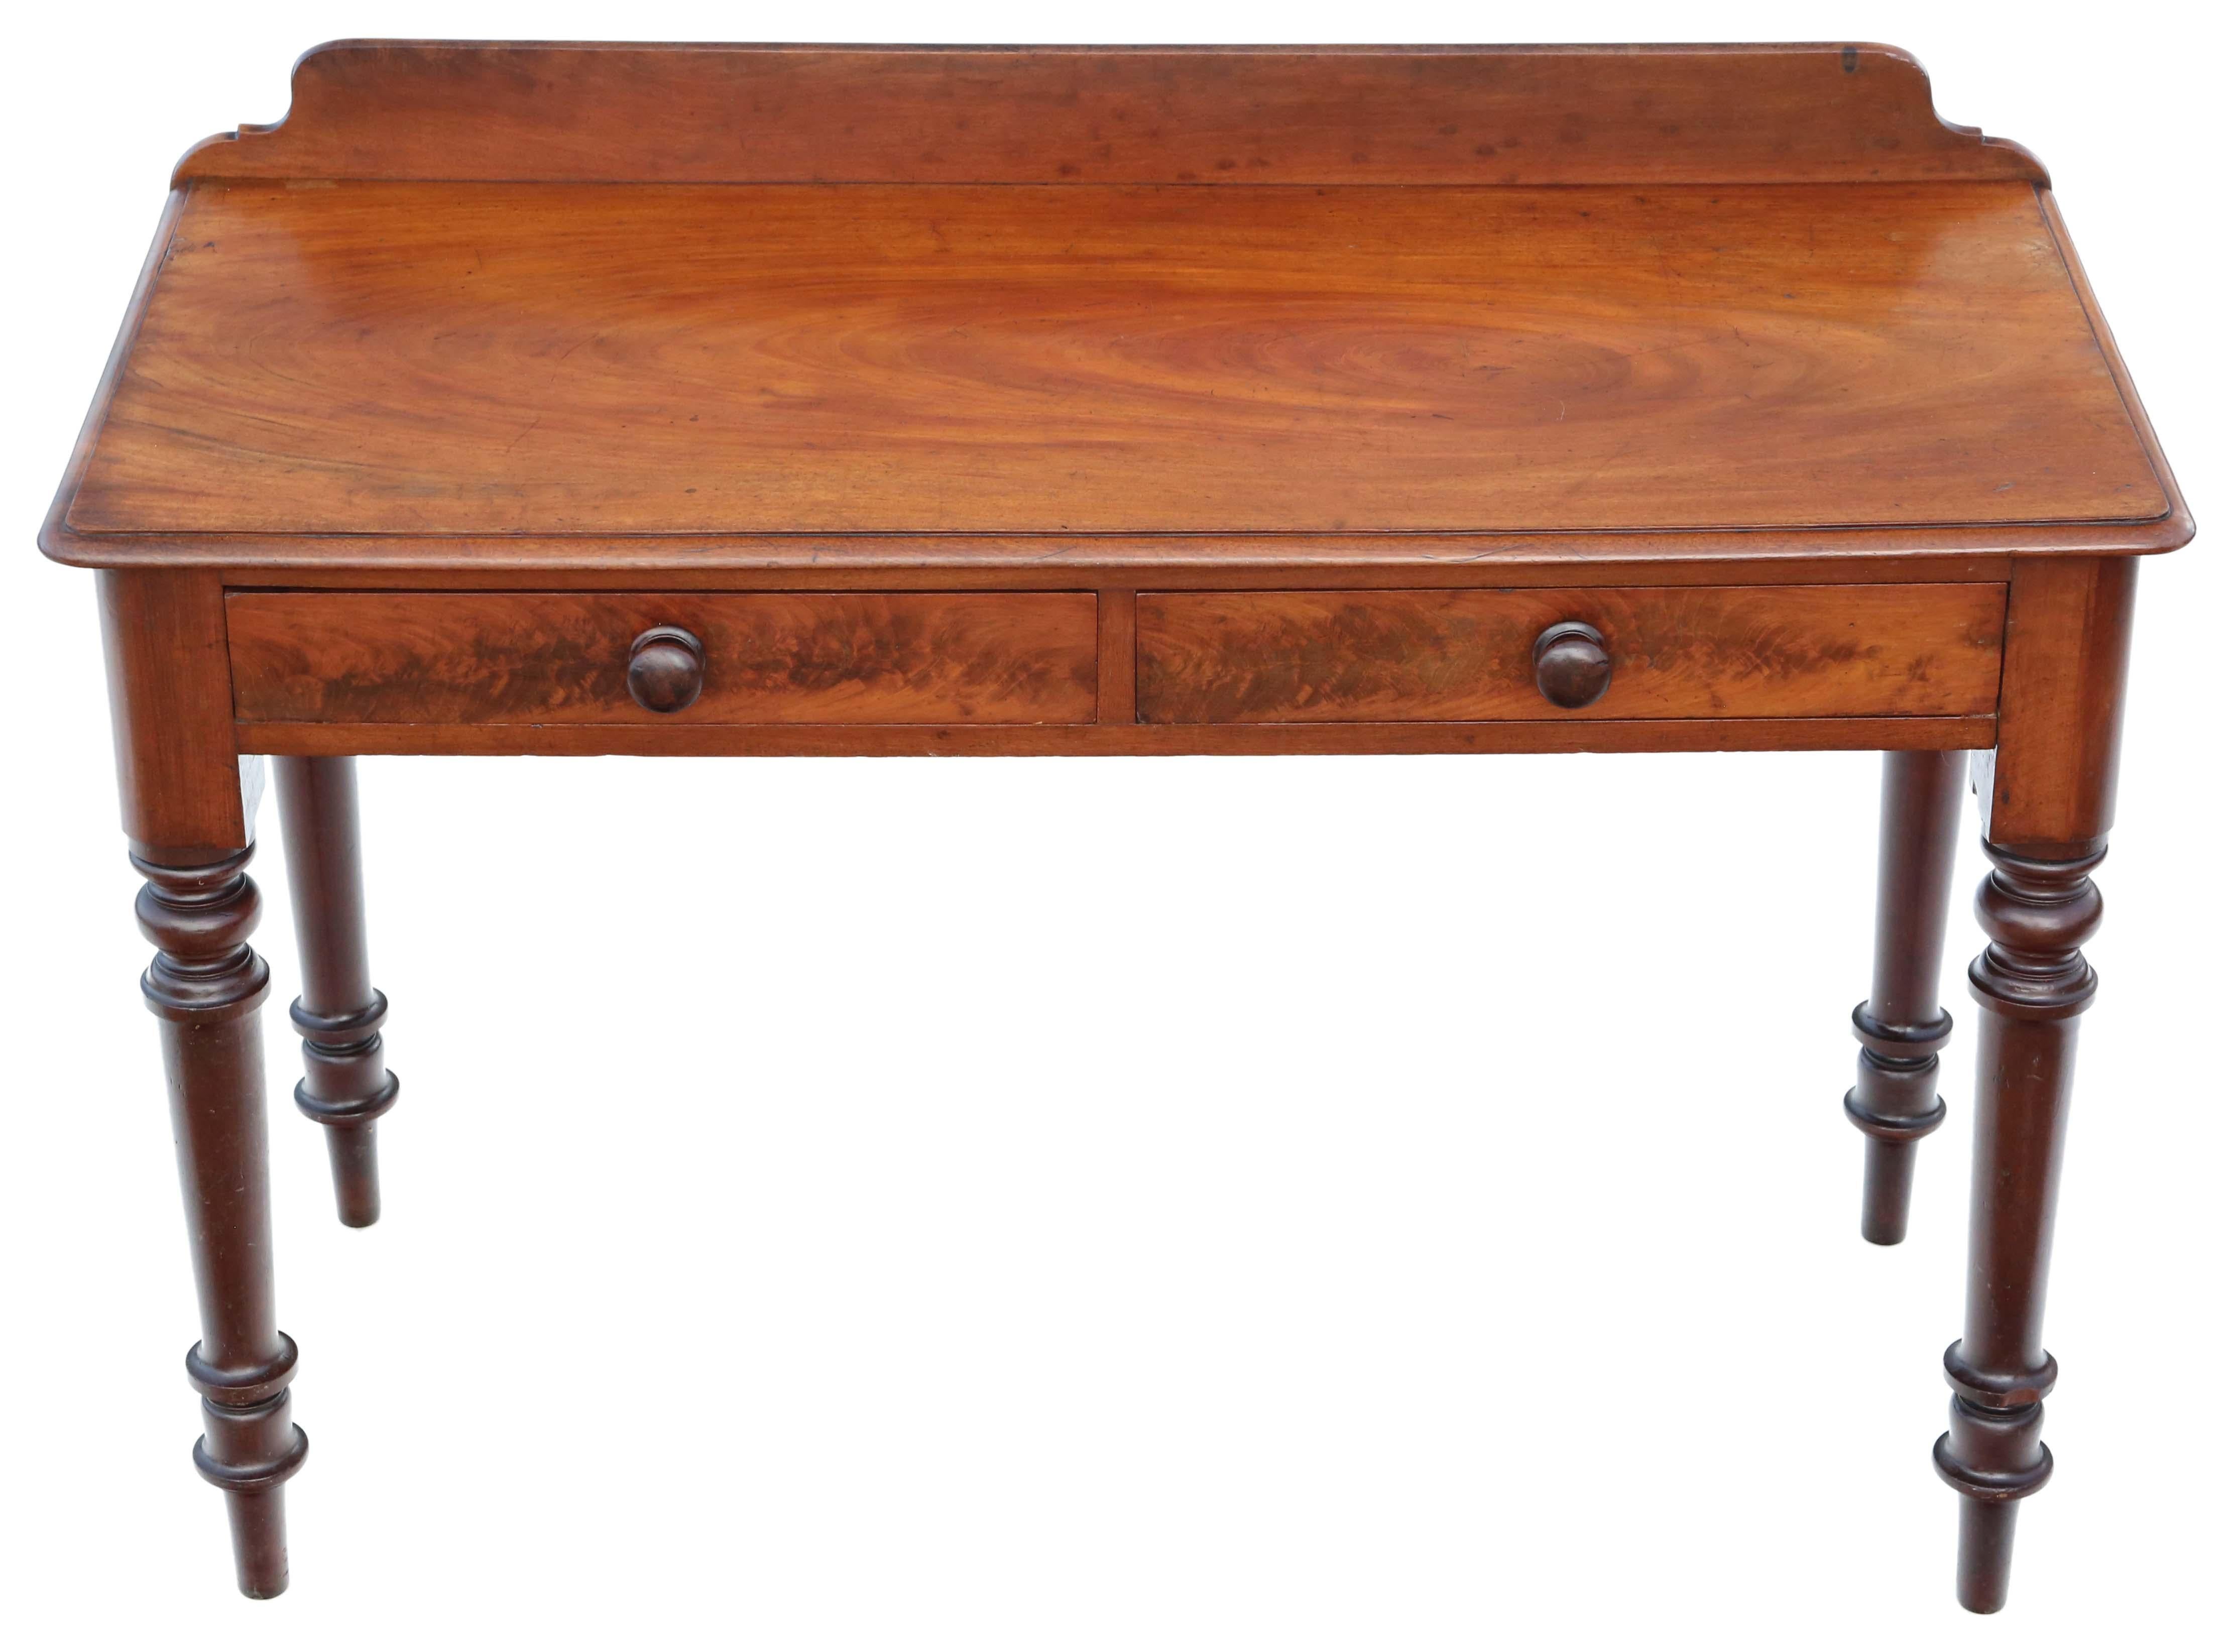 Antique quality 19th Century mahogany writing side dressing table desk. Lovely age colour and patina.

No loose joints and no woodworm. Full of age, character and charm. The mahogany lined drawers slide freely.

Would look great in the right